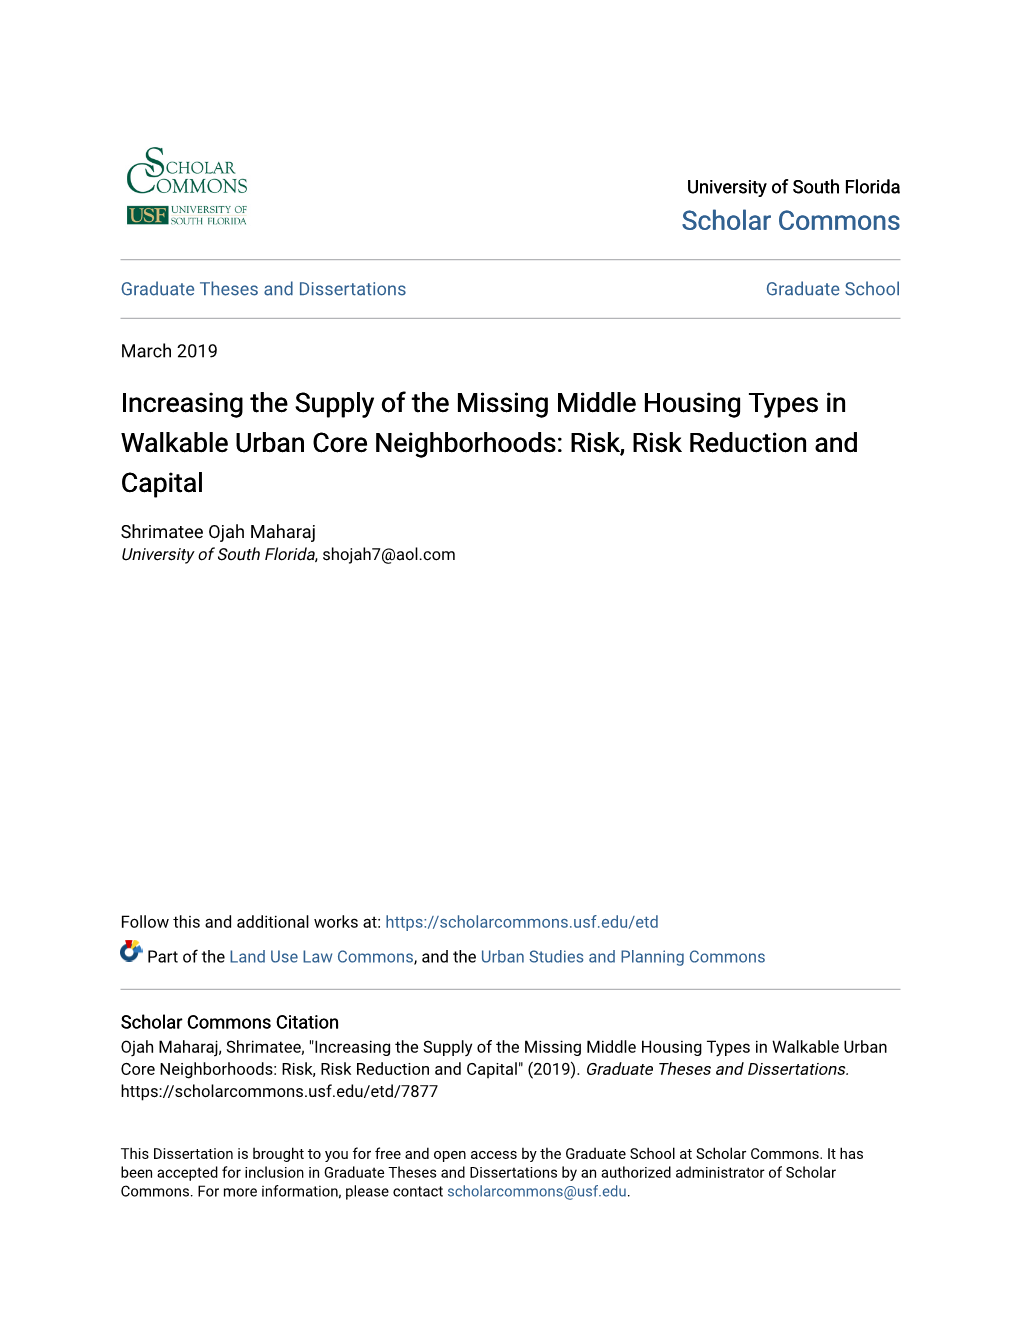 Increasing the Supply of the Missing Middle Housing Types in Walkable Urban Core Neighborhoods: Risk, Risk Reduction and Capital